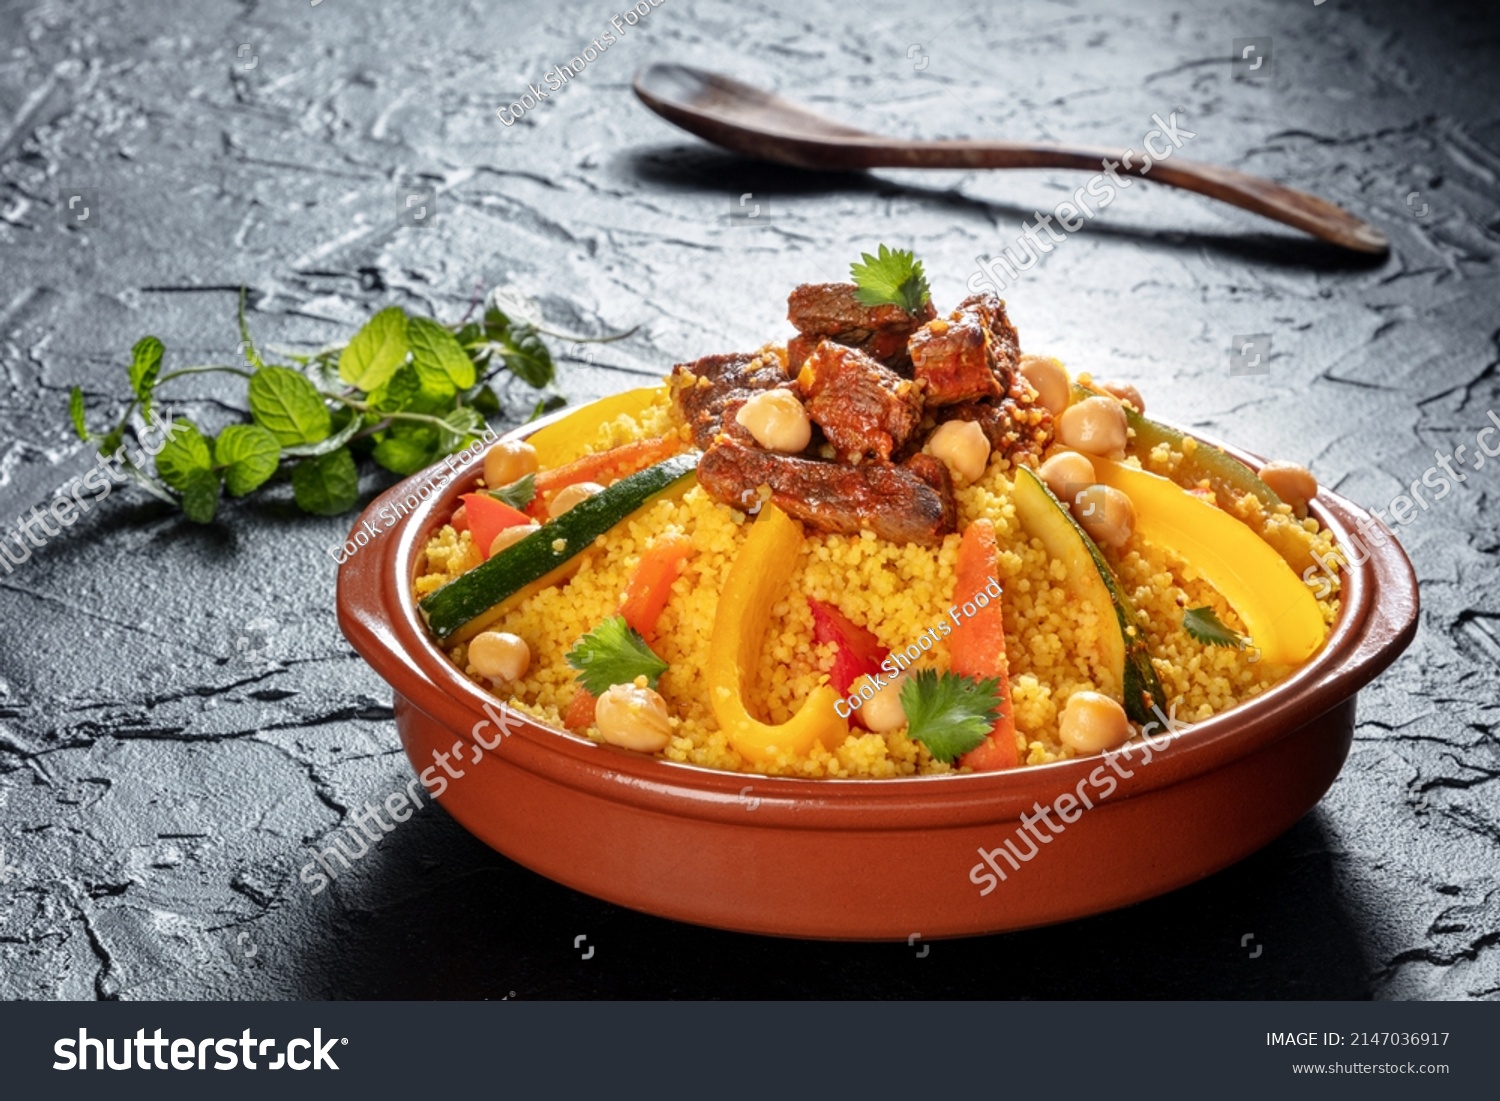 Meat and vegetable couscous in a bowl, typical food from Morocco, a traditional festive Arabic dish with herbs and spices #2147036917